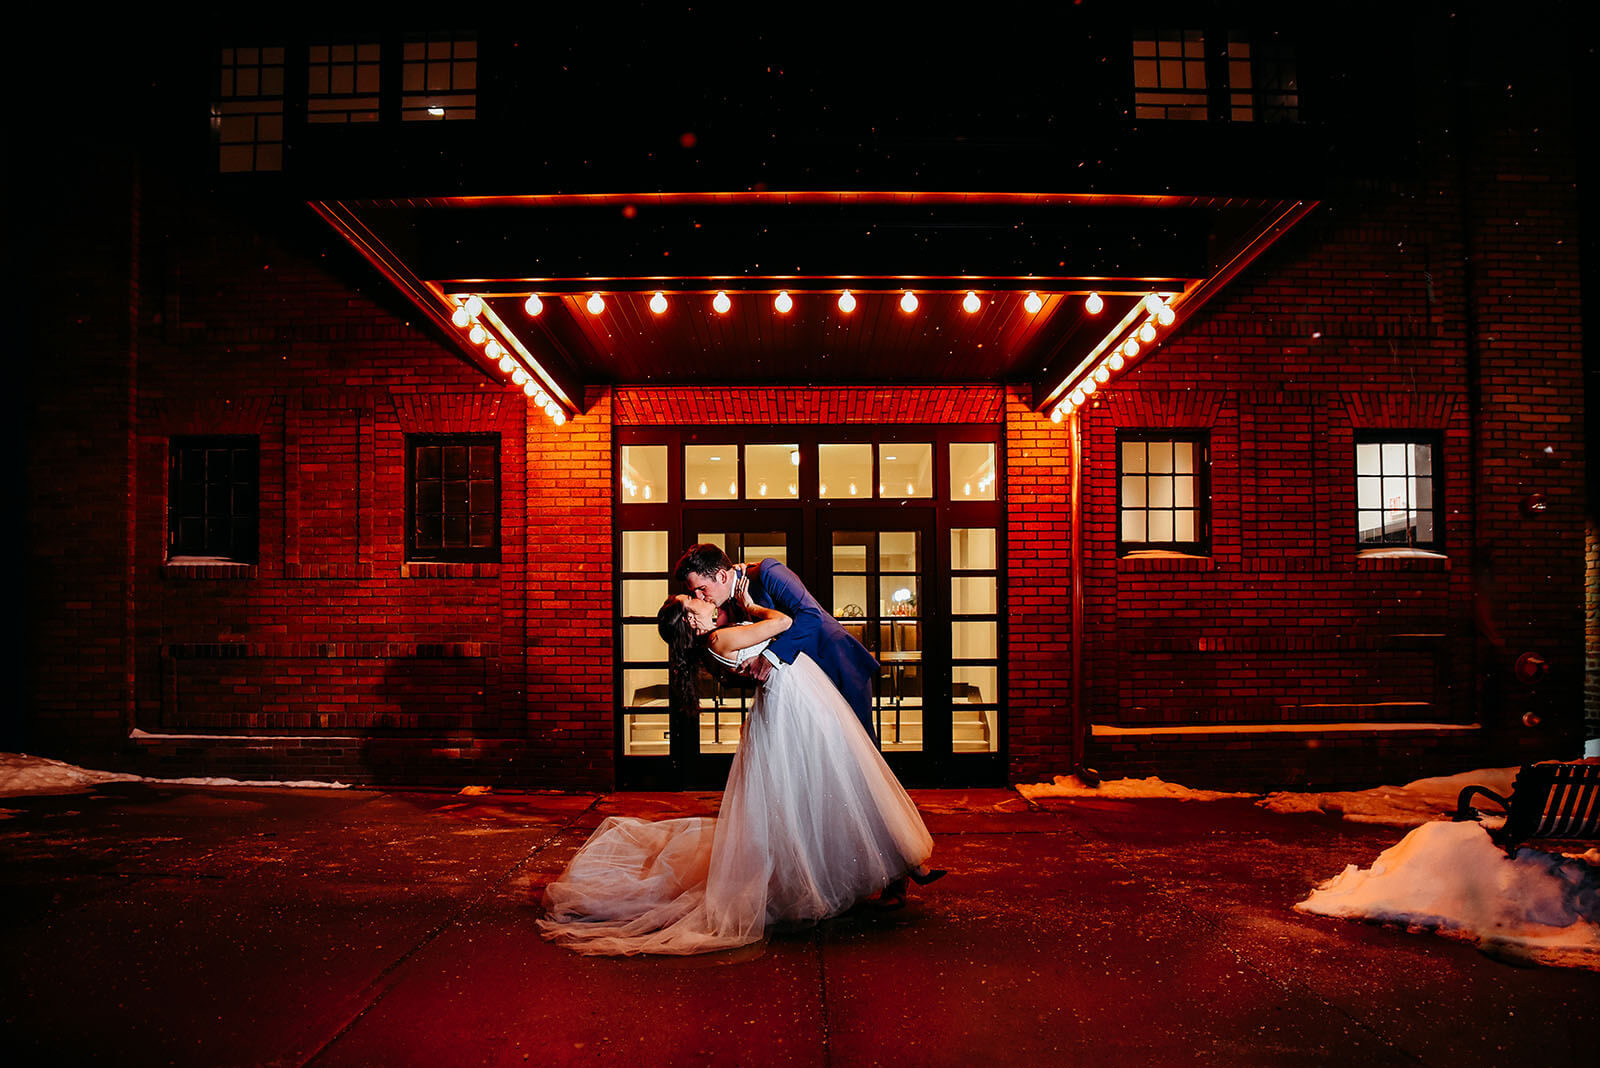 Bride and groom sharing a kiss at night underneath the Dawn Theater marquee lights